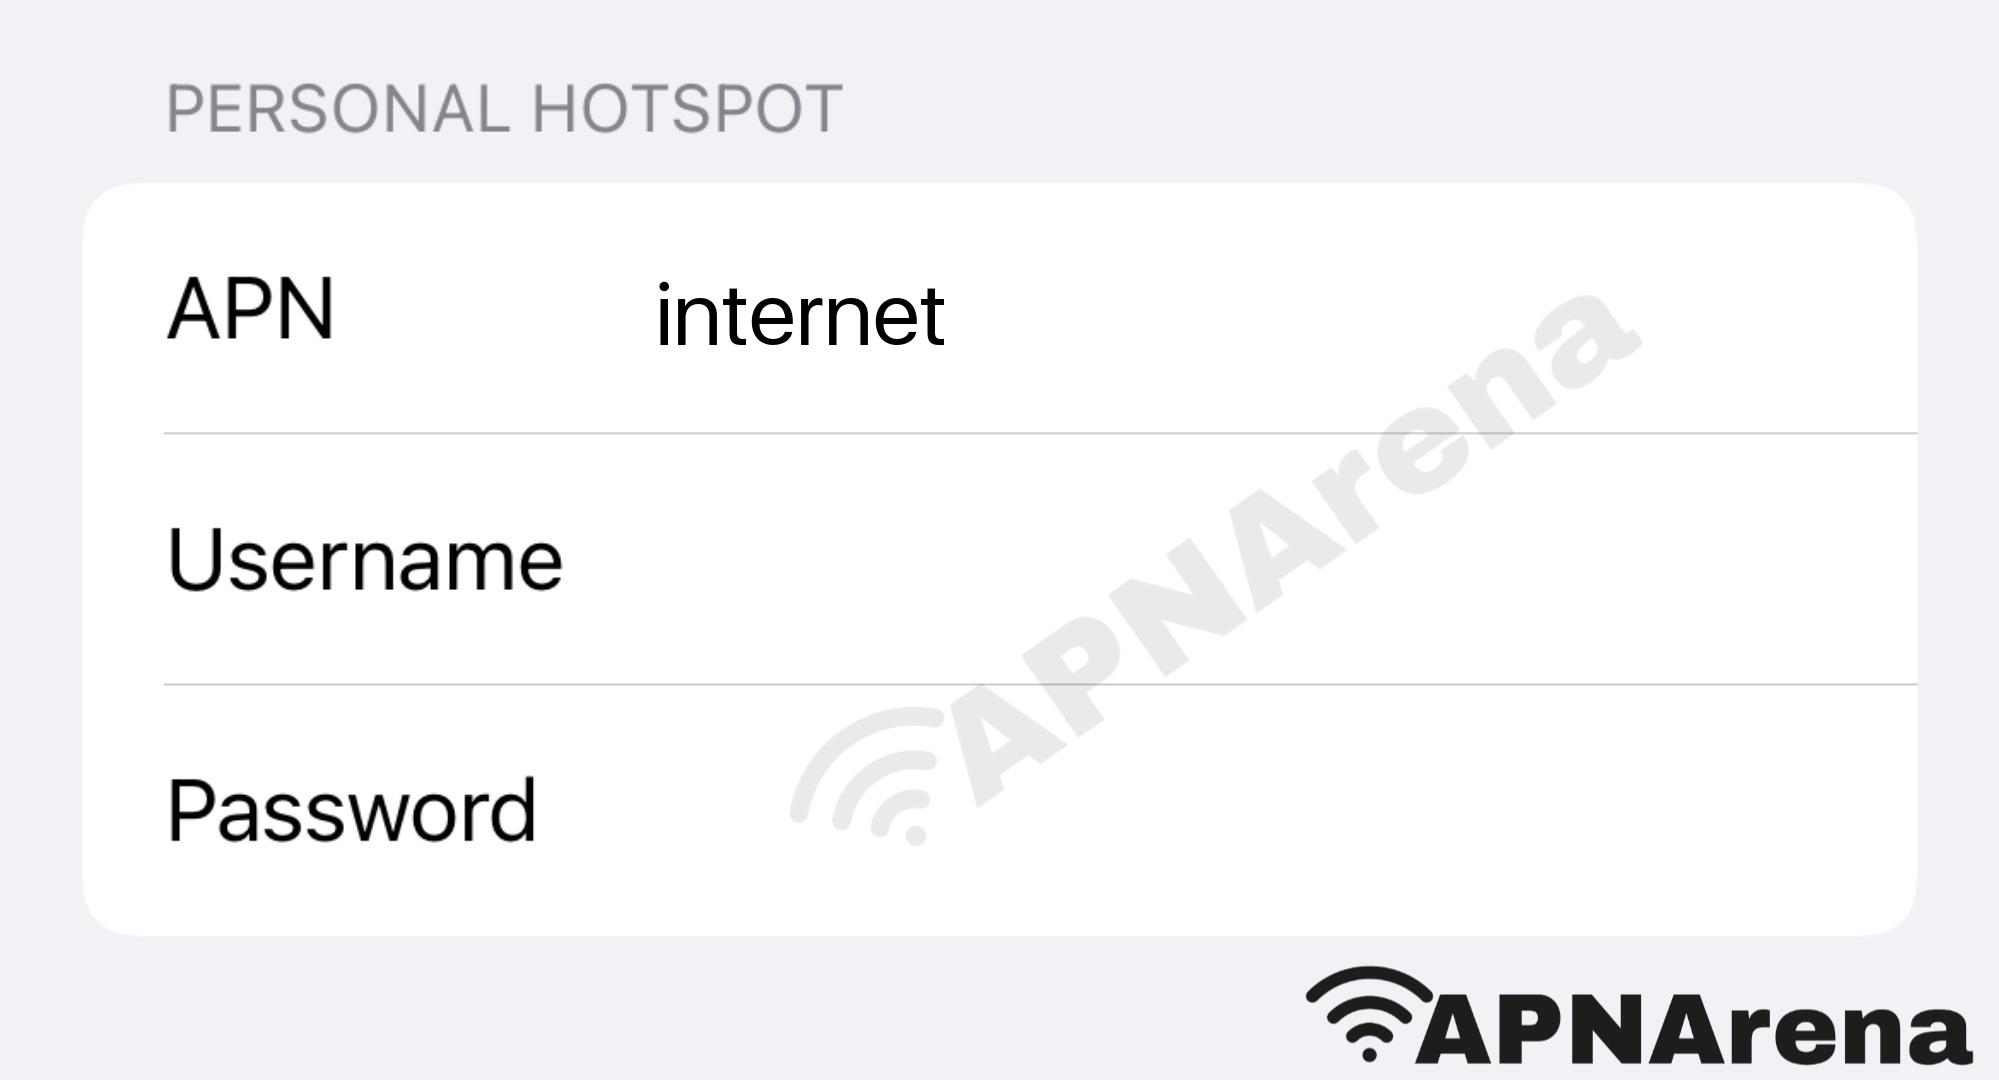 Call & Give Personal Hotspot Settings for iPhone